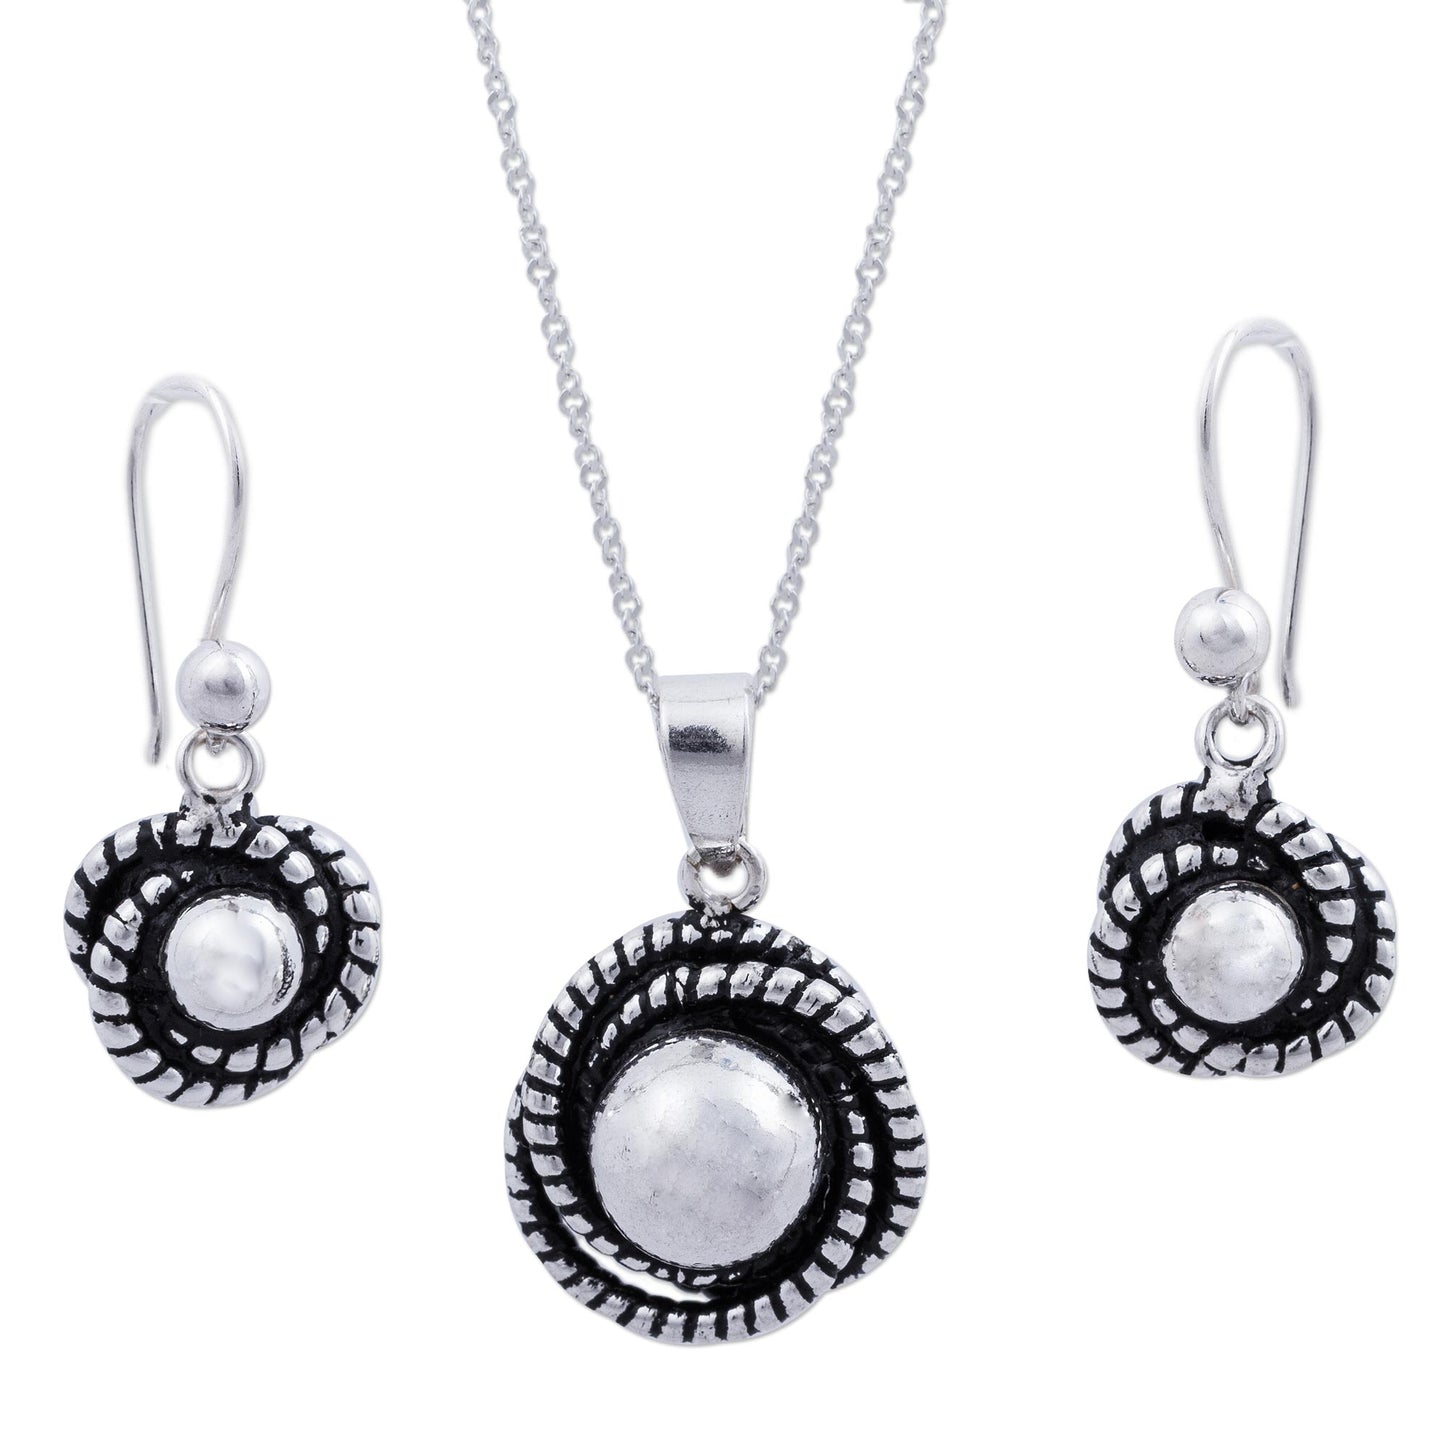 Hummingbird Nest Modern Necklace and Earrings Set Crafted of Andean Silver